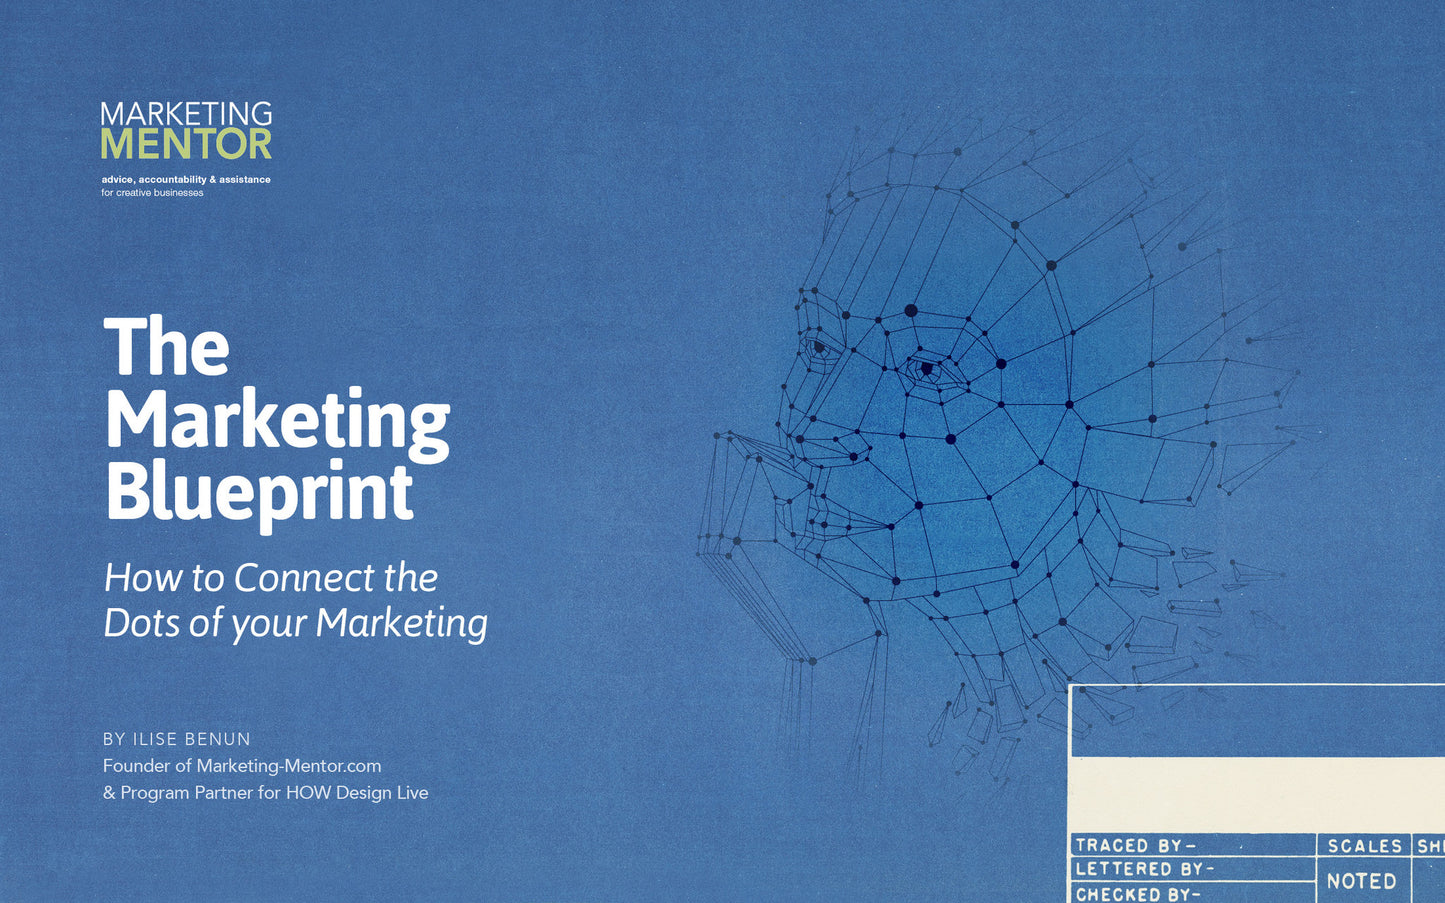 The Marketing Blueprint - How to Connect the Dots of Your Marketing